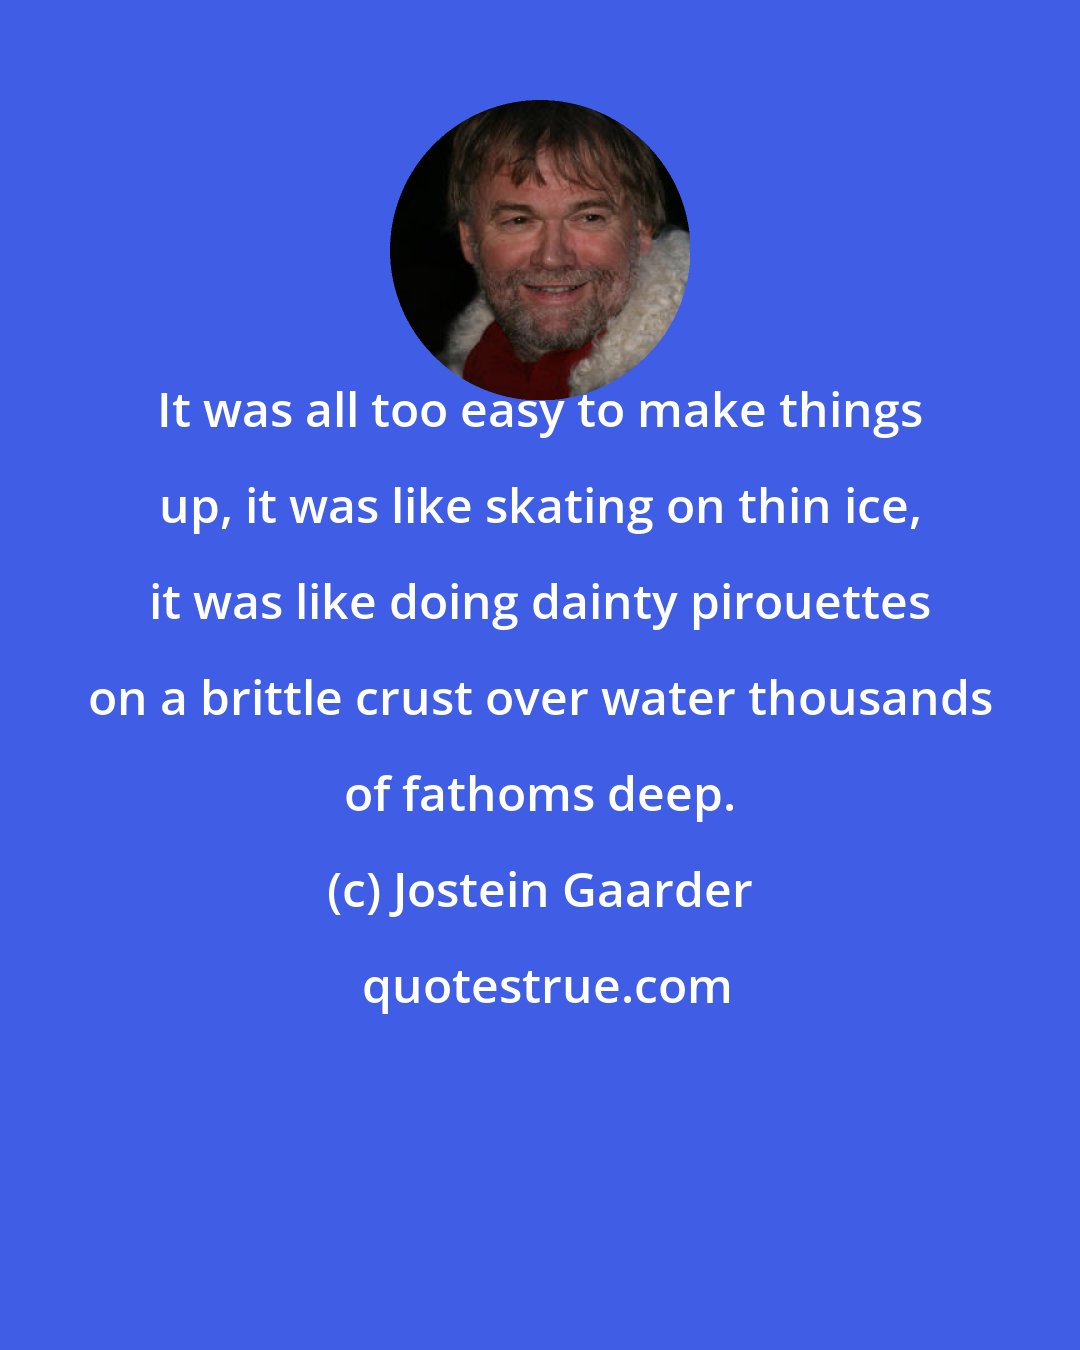 Jostein Gaarder: It was all too easy to make things up, it was like skating on thin ice, it was like doing dainty pirouettes on a brittle crust over water thousands of fathoms deep.